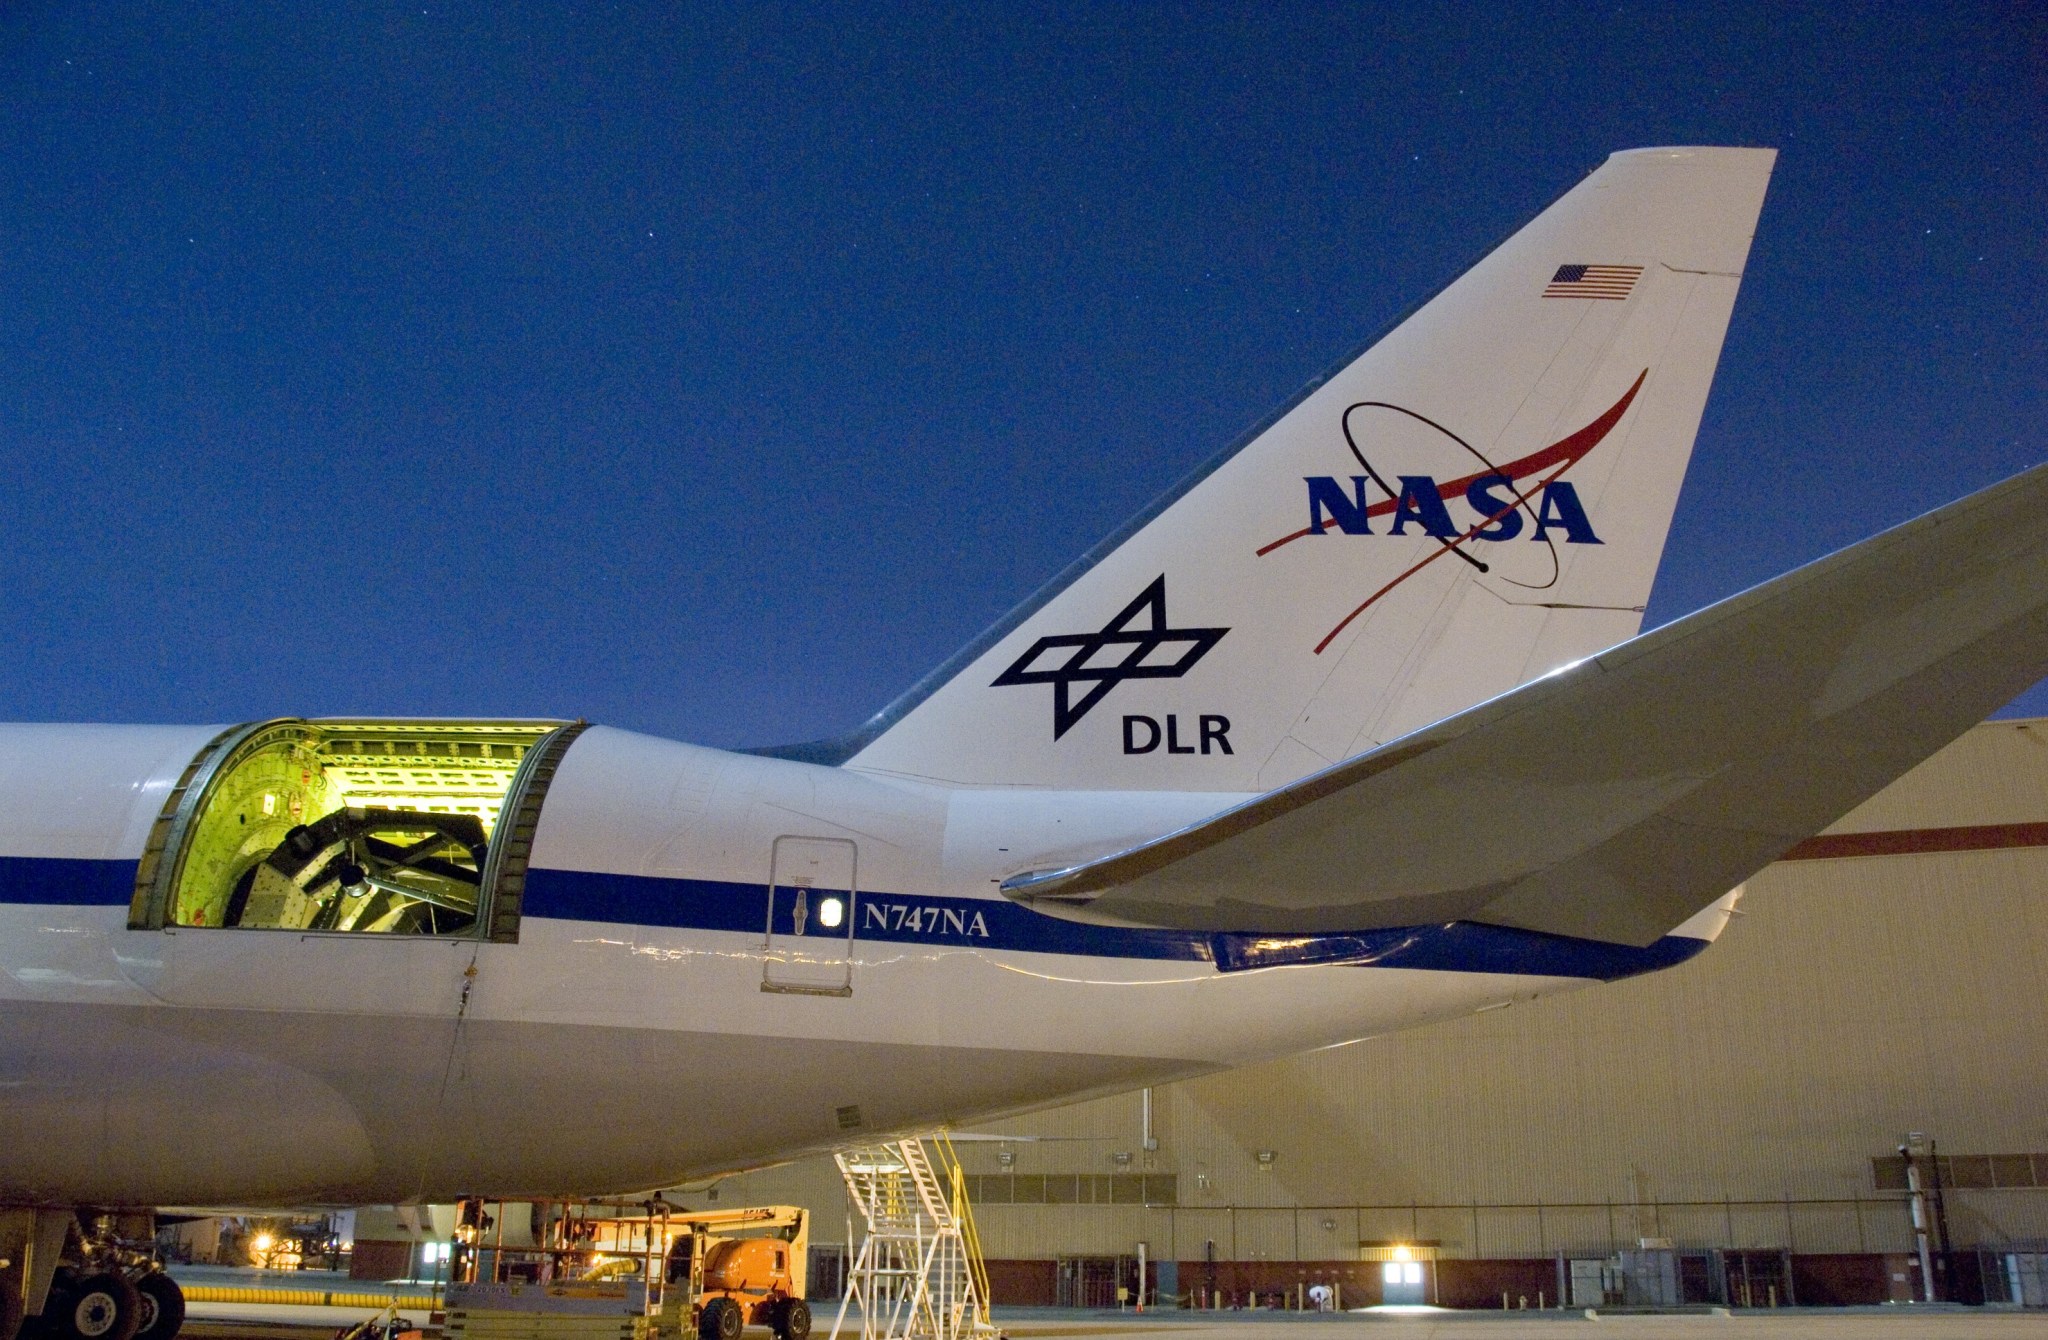 The tail of NASA reserach aircraft with the rear door open.